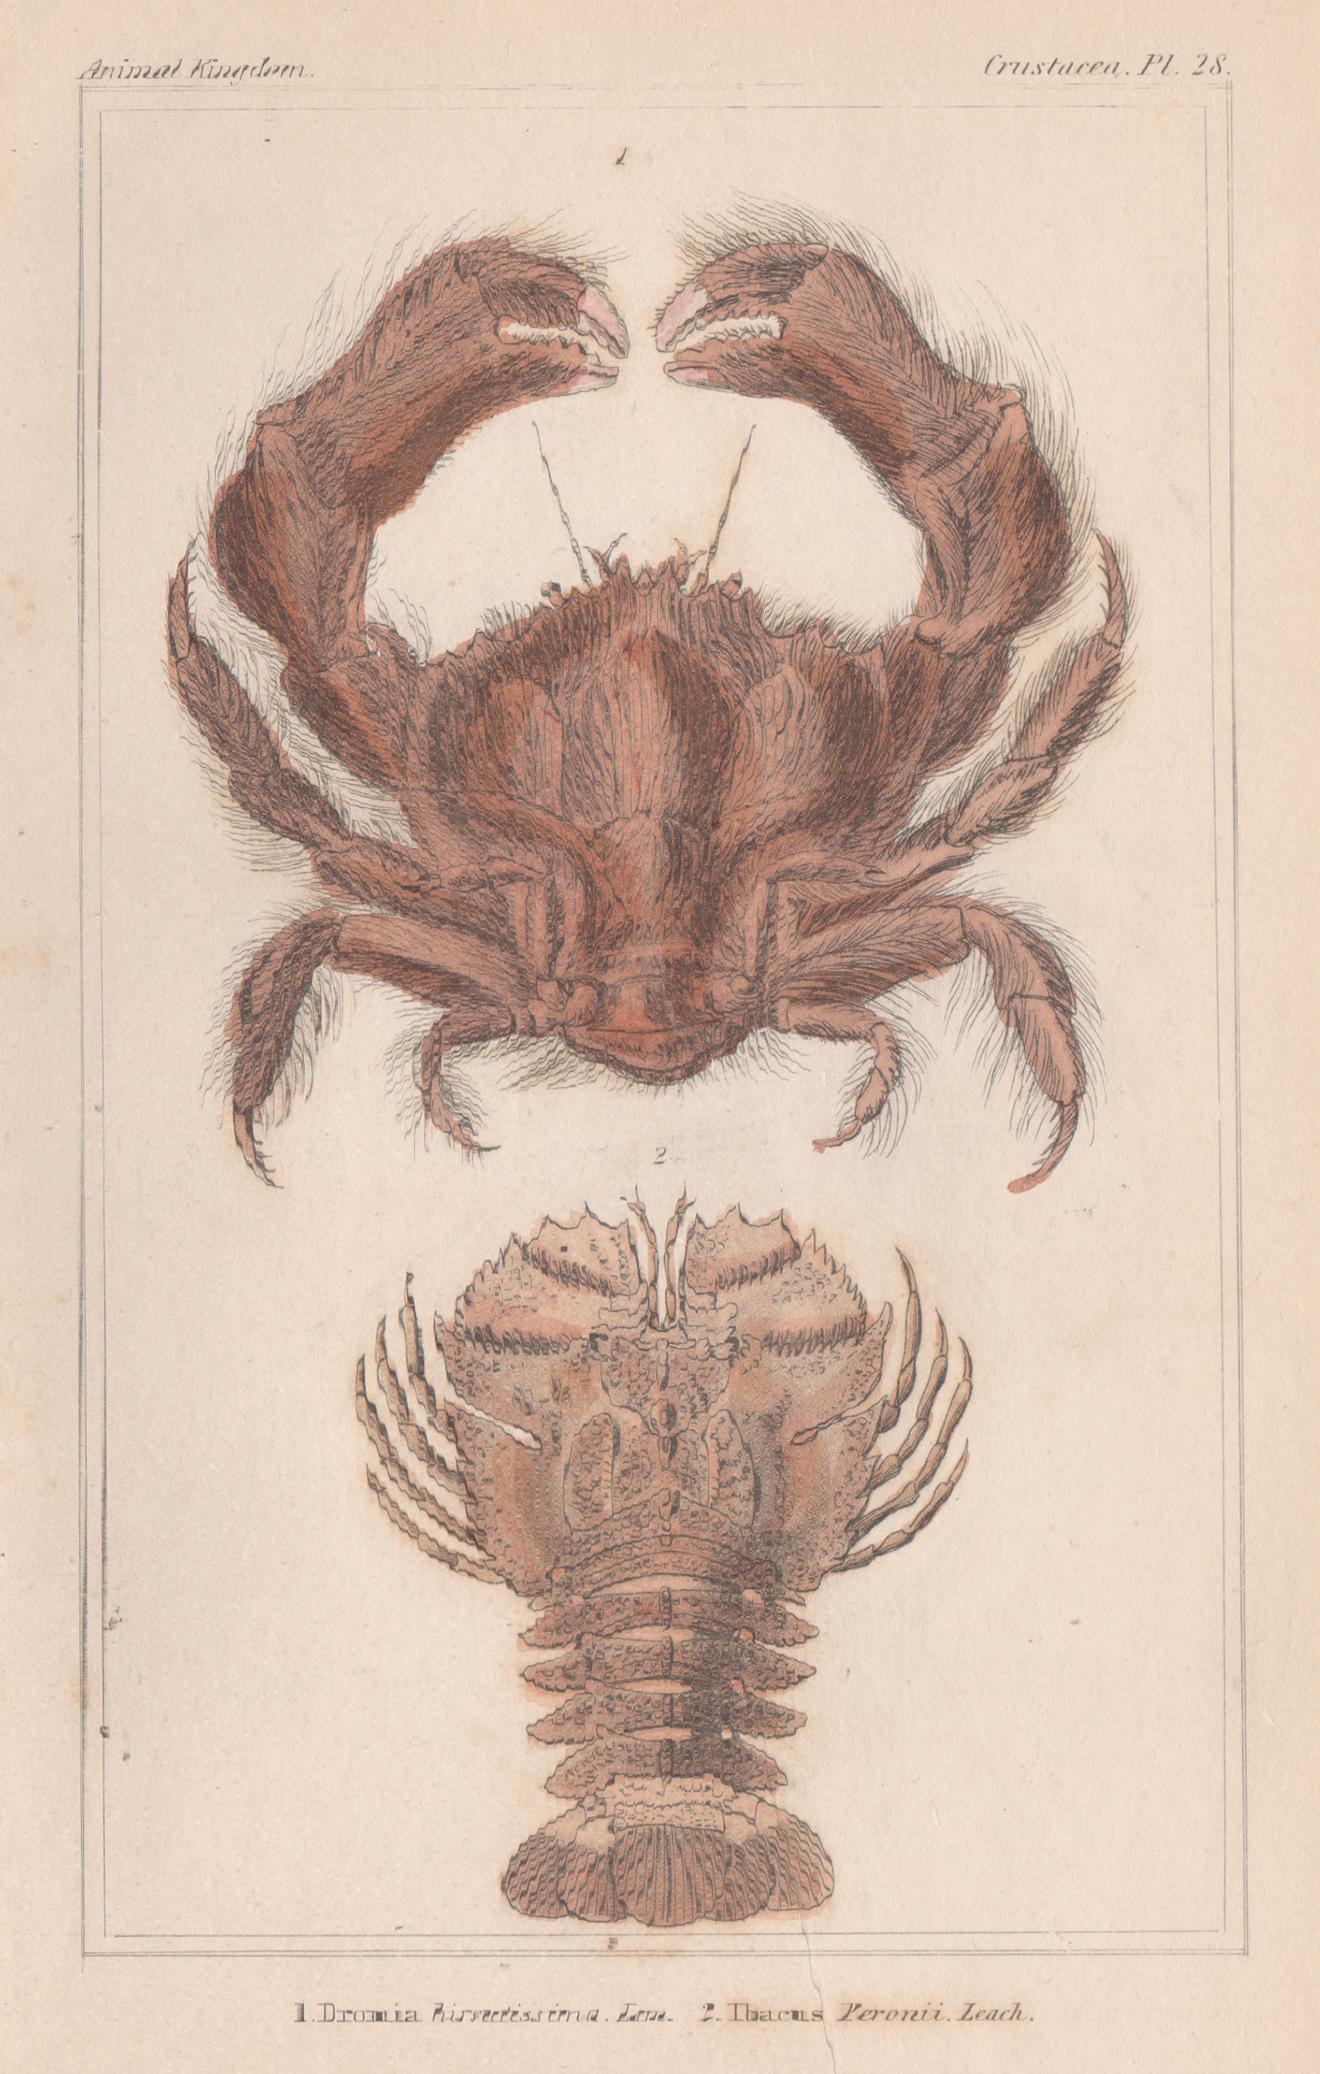 Unknown Animal Print - Crustaceans - Crab & Lobster, English natural history engraving print, 1837